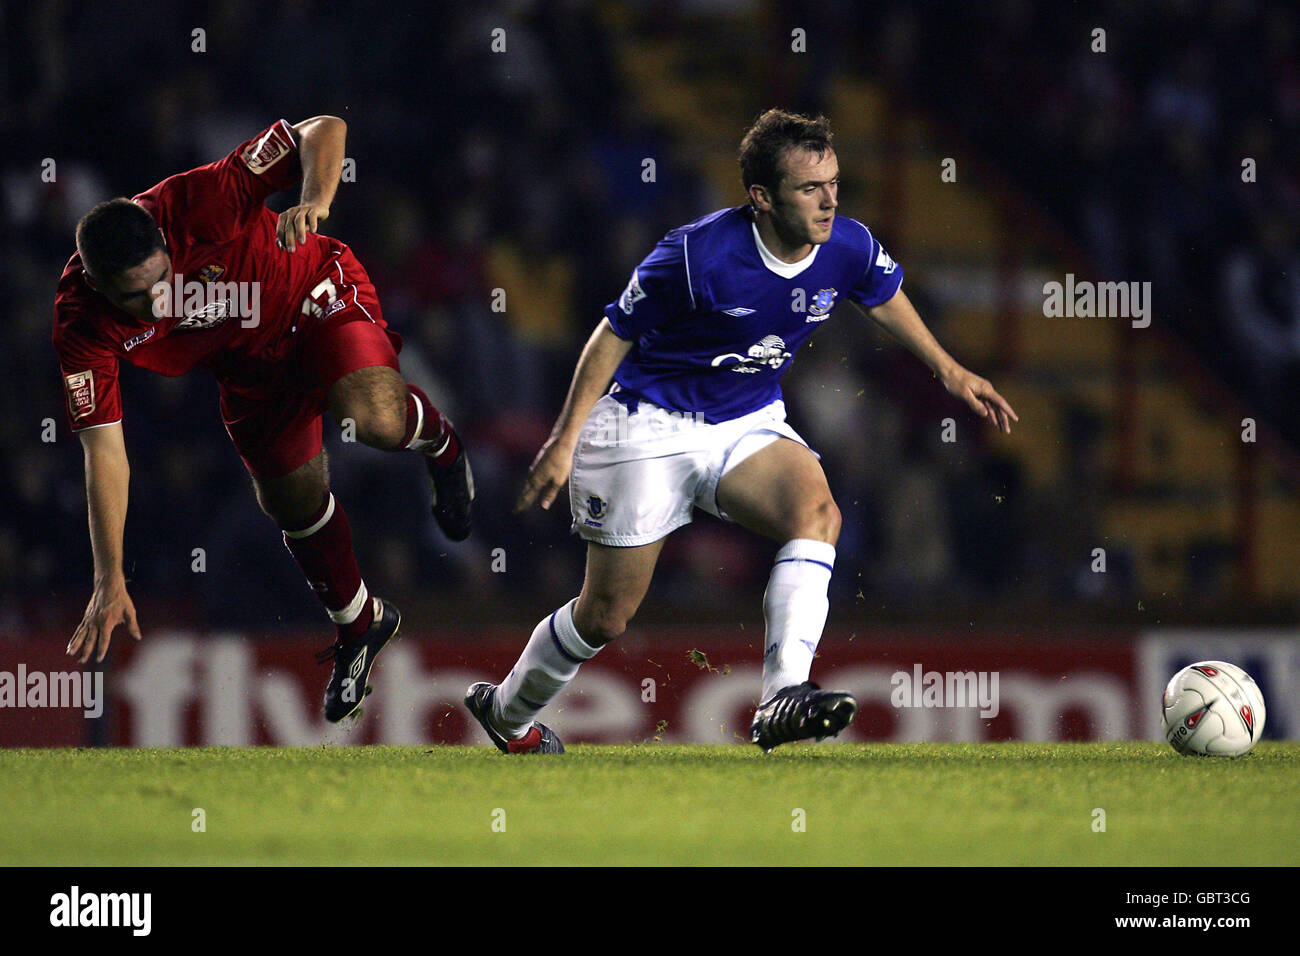 Bristol City's Bradley Orr (l) is sent flying by a challenge from Everton's James McFadden (r) Stock Photo